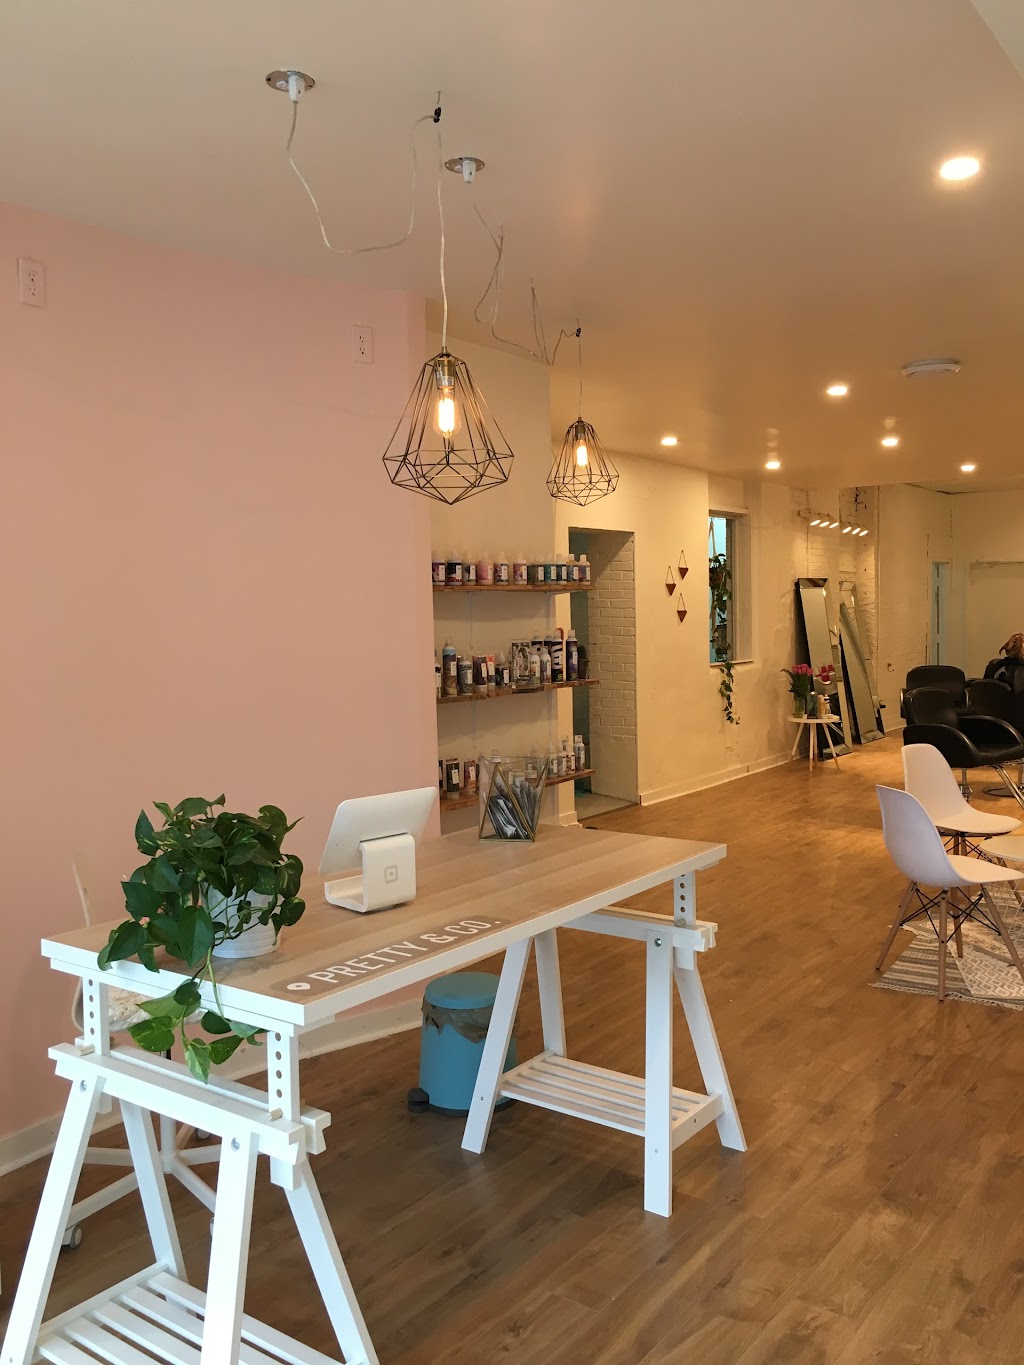 Pretty and Co. | 101 Hannover Dr, St. Catharines, ON L2W 1A3, Canada | Phone: (905) 324-6480